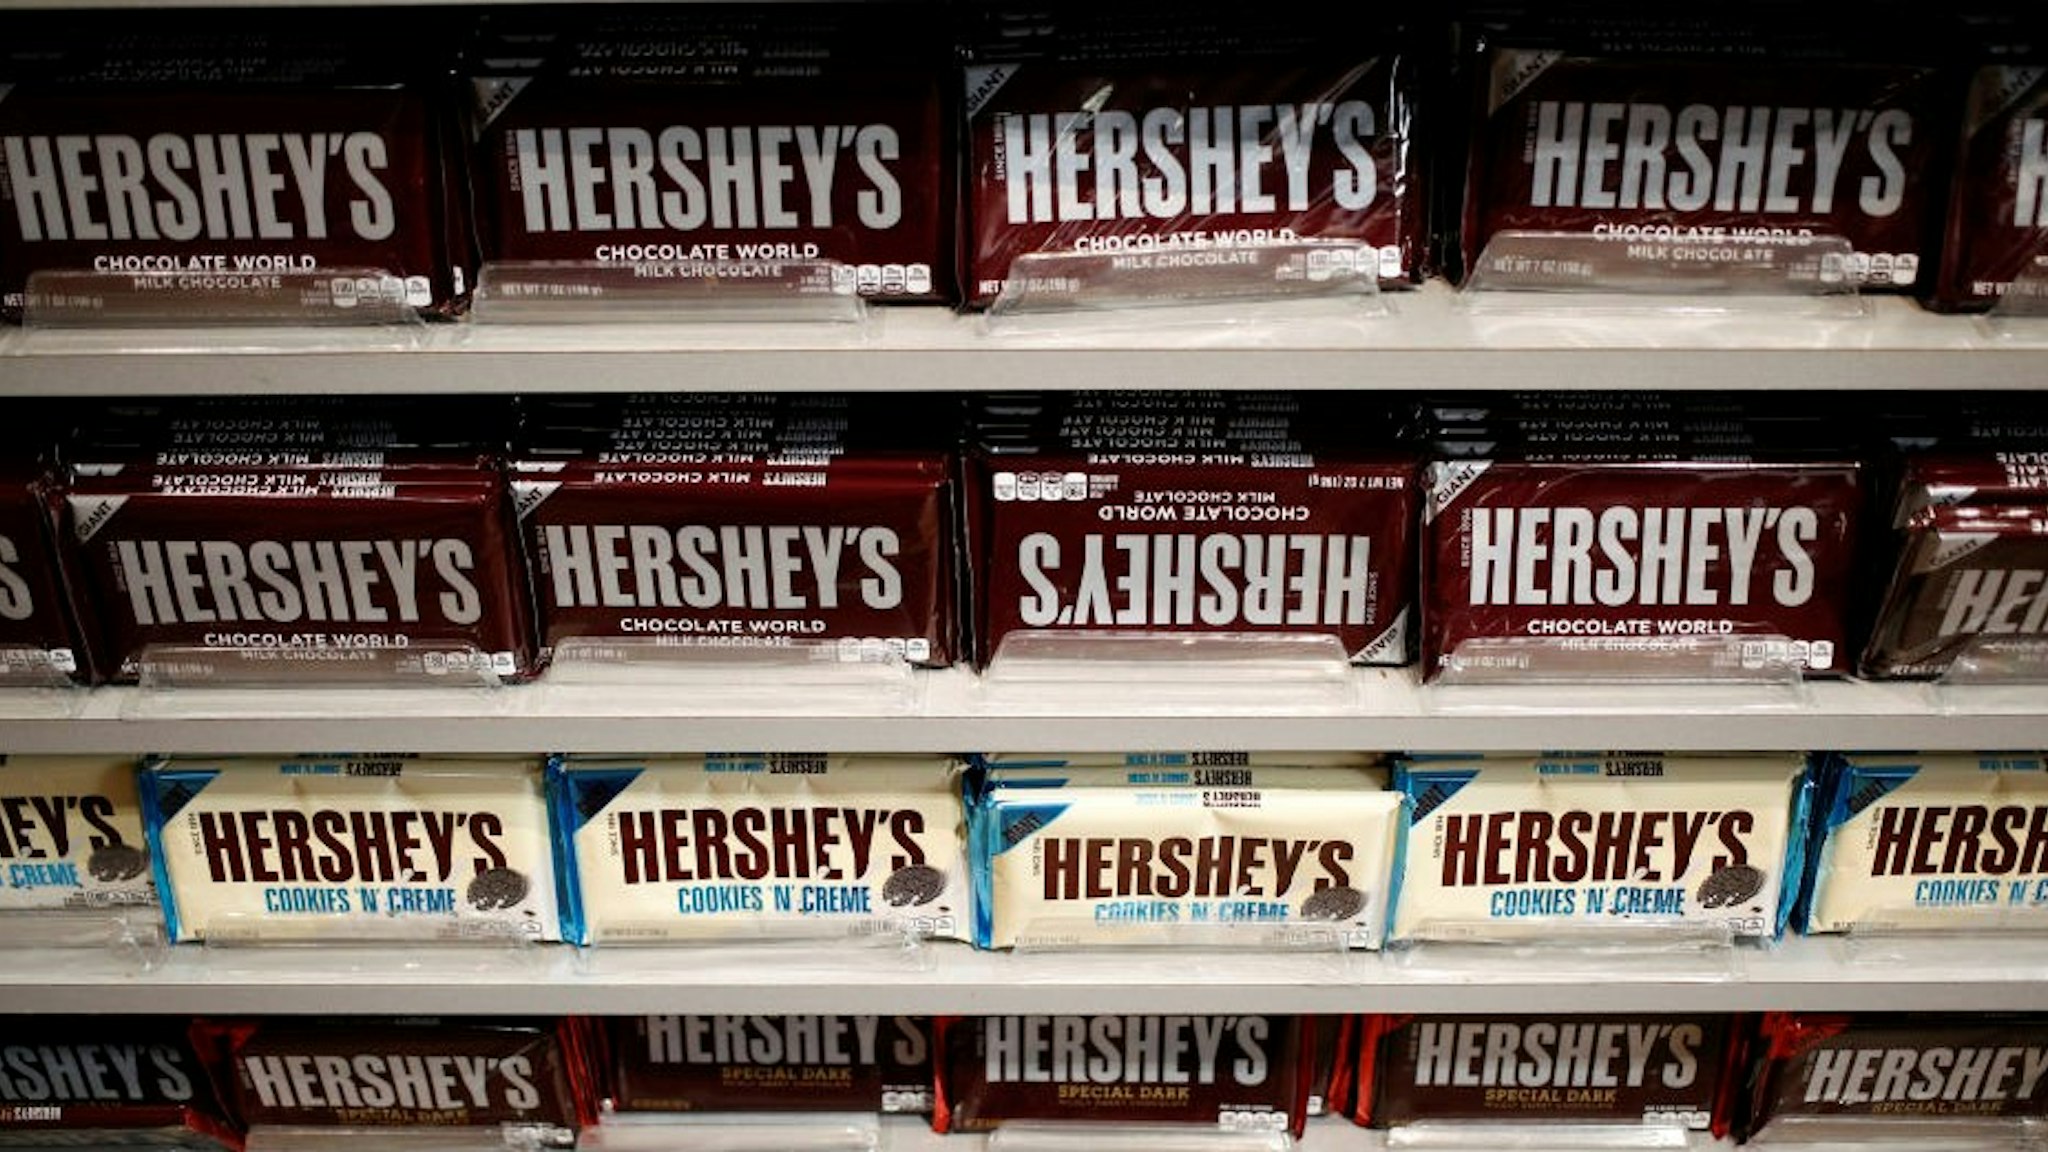 Hershey Co. candy bars are displayed for sale inside of the company's Chocolate World visitor center in Hershey, Pennsylvania, U.S., on Tuesday, Nov. 28, 2017. Hershey launched its first new bar brand, "Hershey's Gold," in 22 years nationwide on Friday. Photographer: